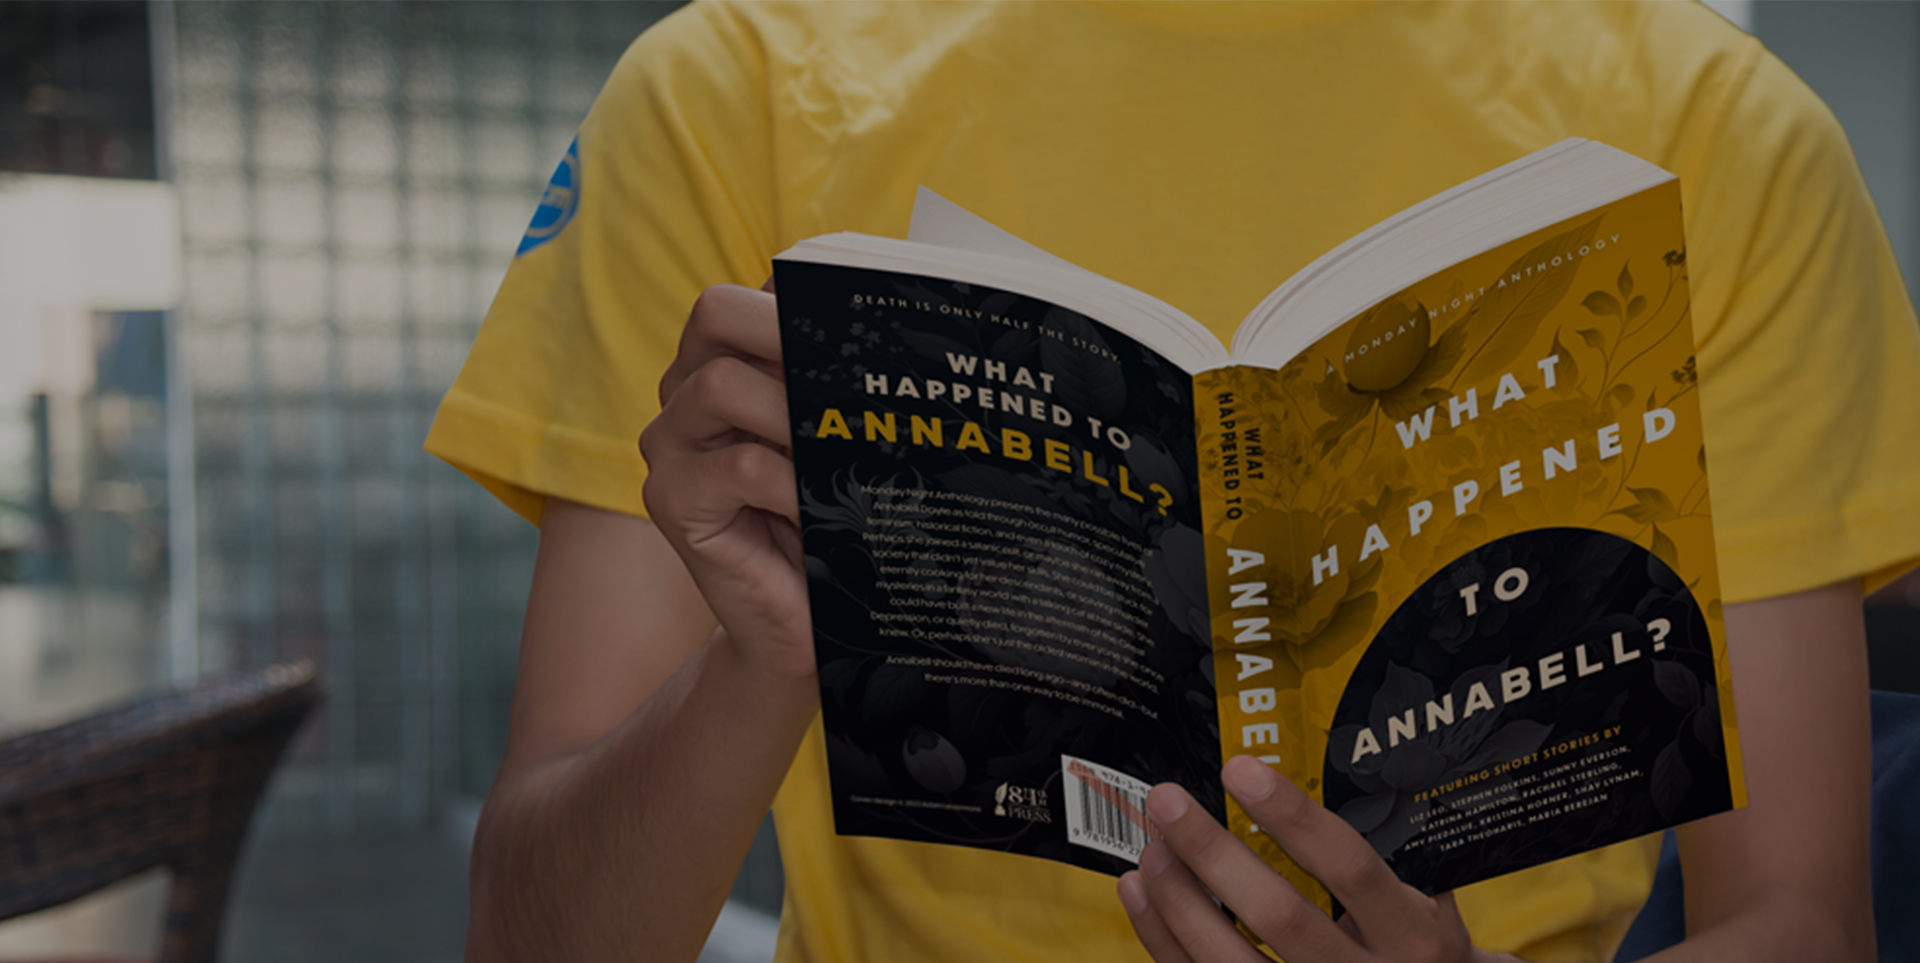 Person in a yellow shirt reading a paperback book titled "What Happened to Annabell?"